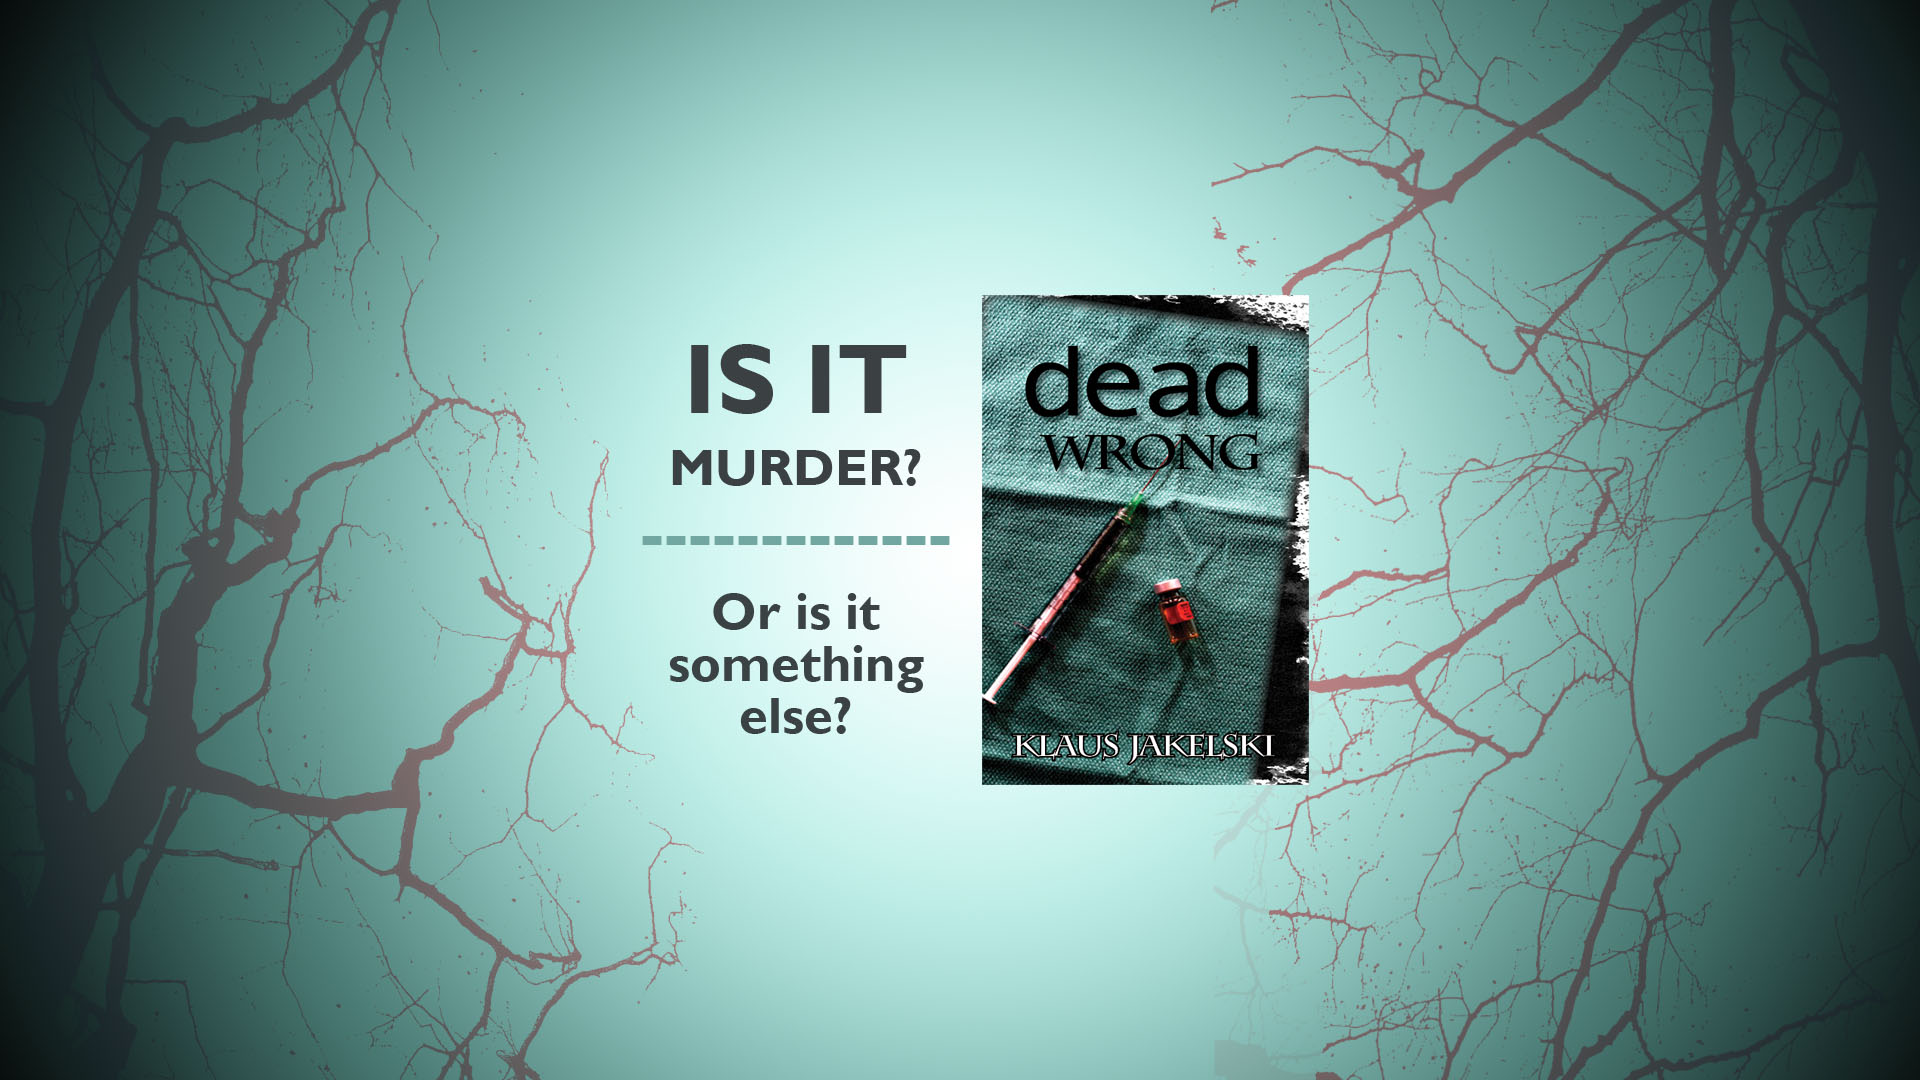 Book - Dead Wrong - IS IT MURDER? Or is its something else?